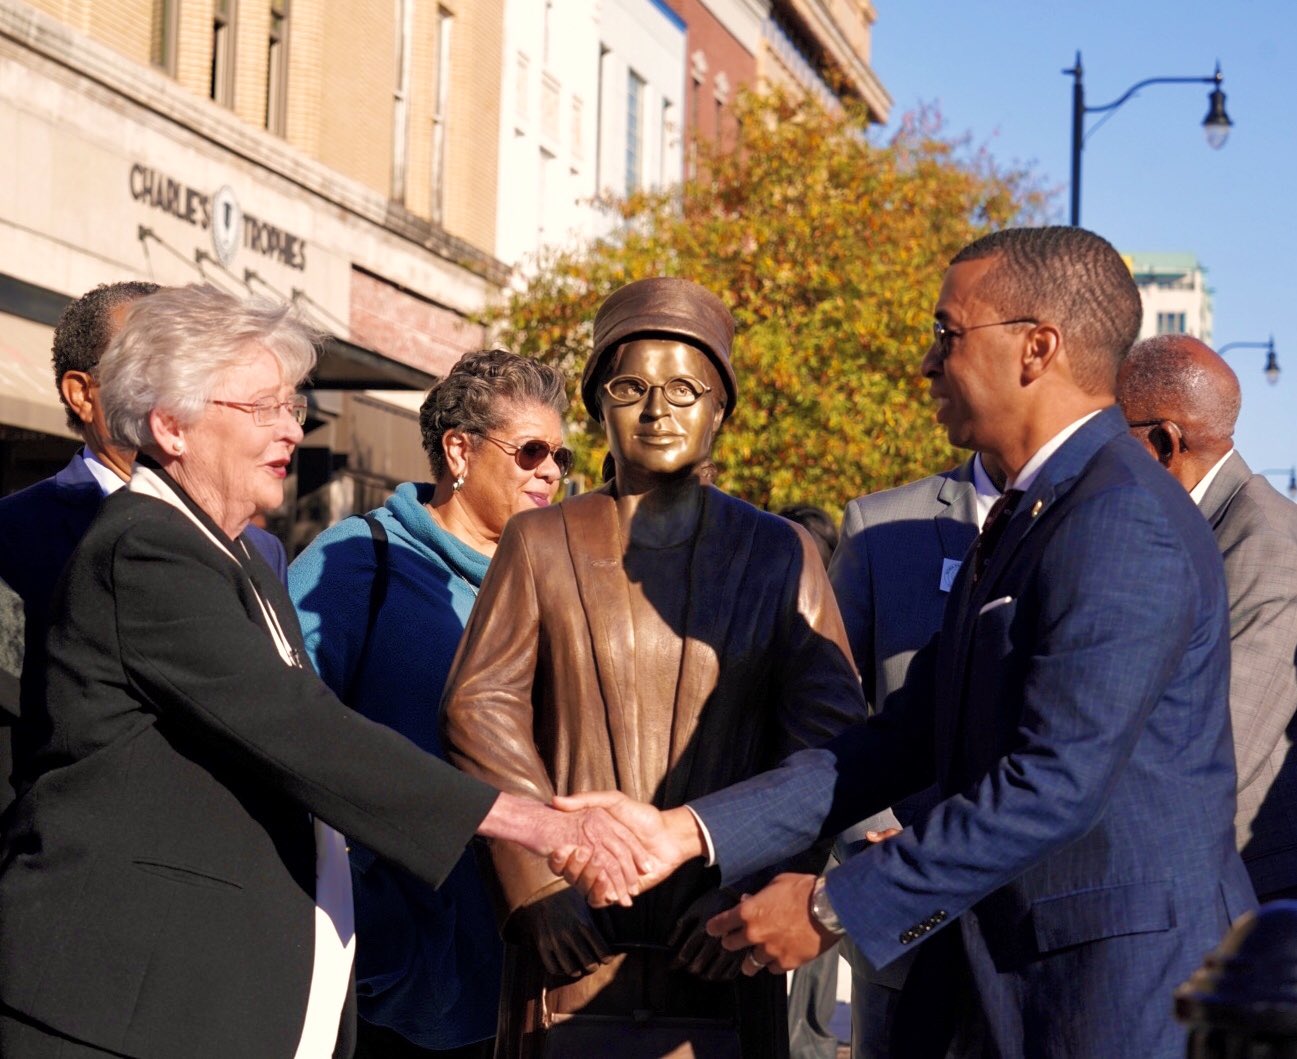 The New Rosa Parks Statue in Montgomery, Alabama